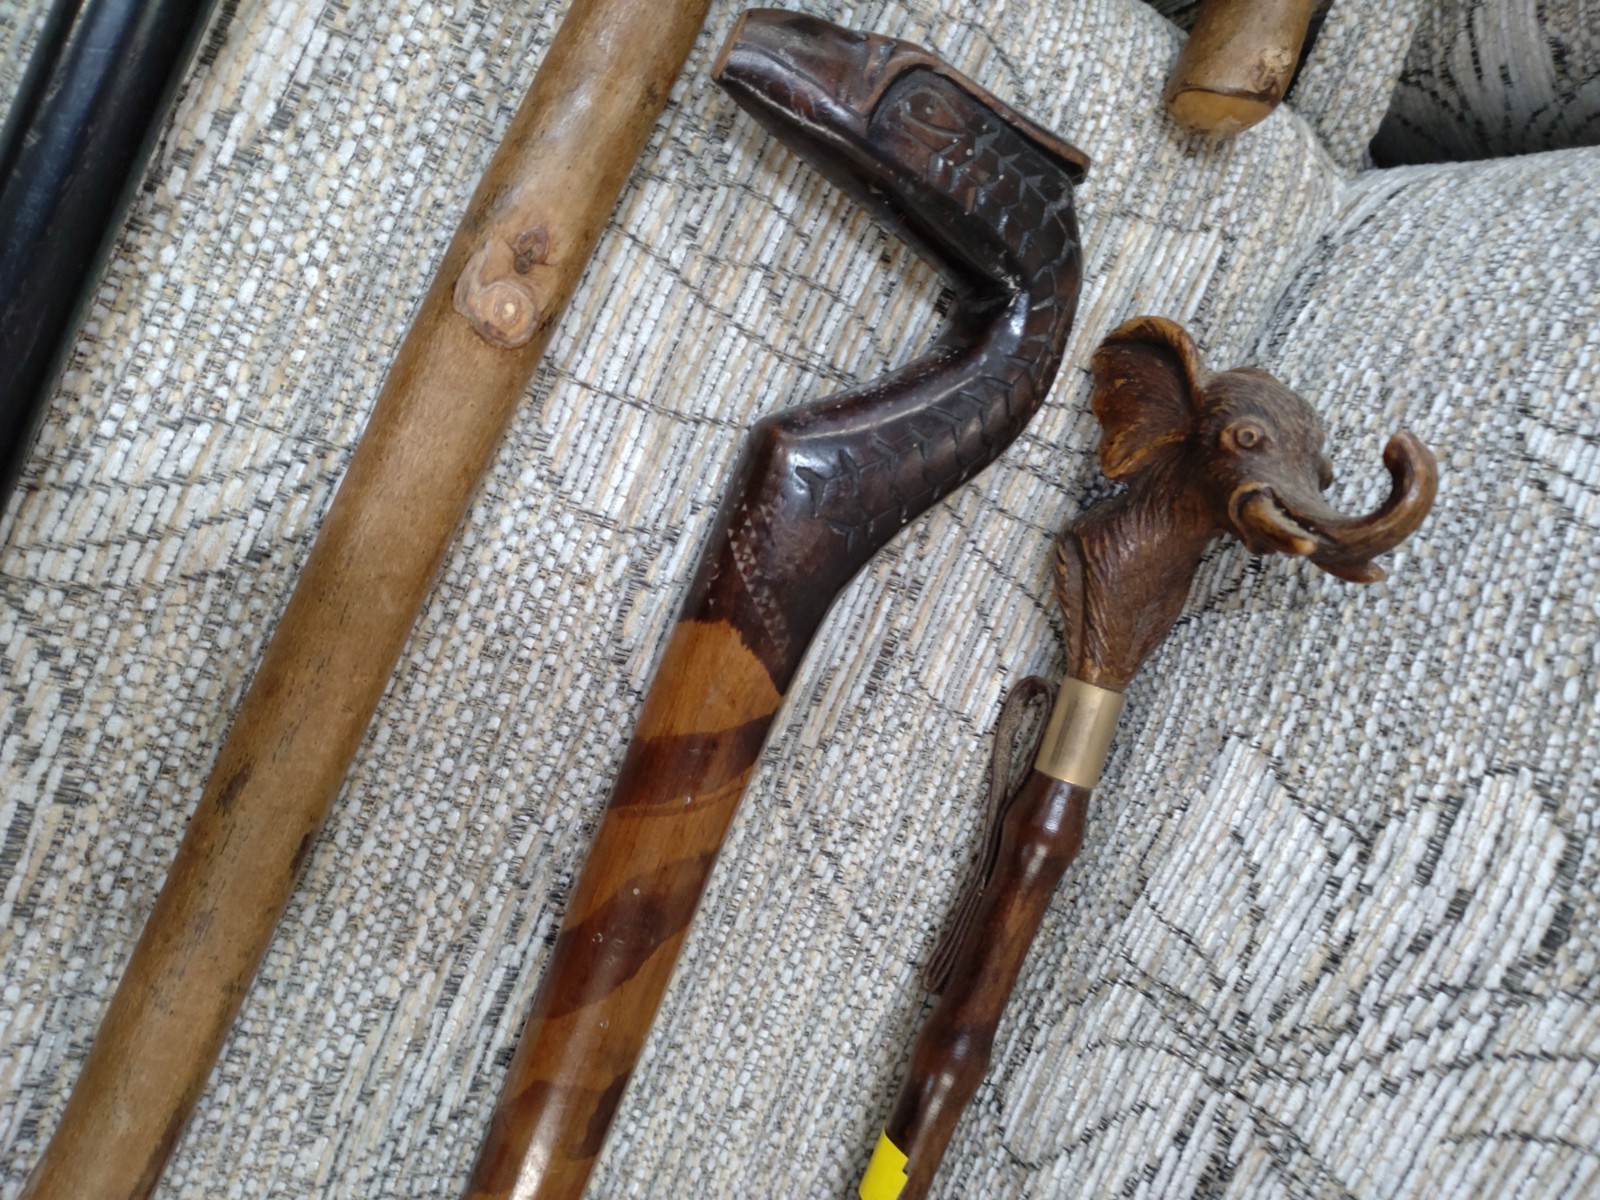 various walking sticks and shoe horns - Image 2 of 2